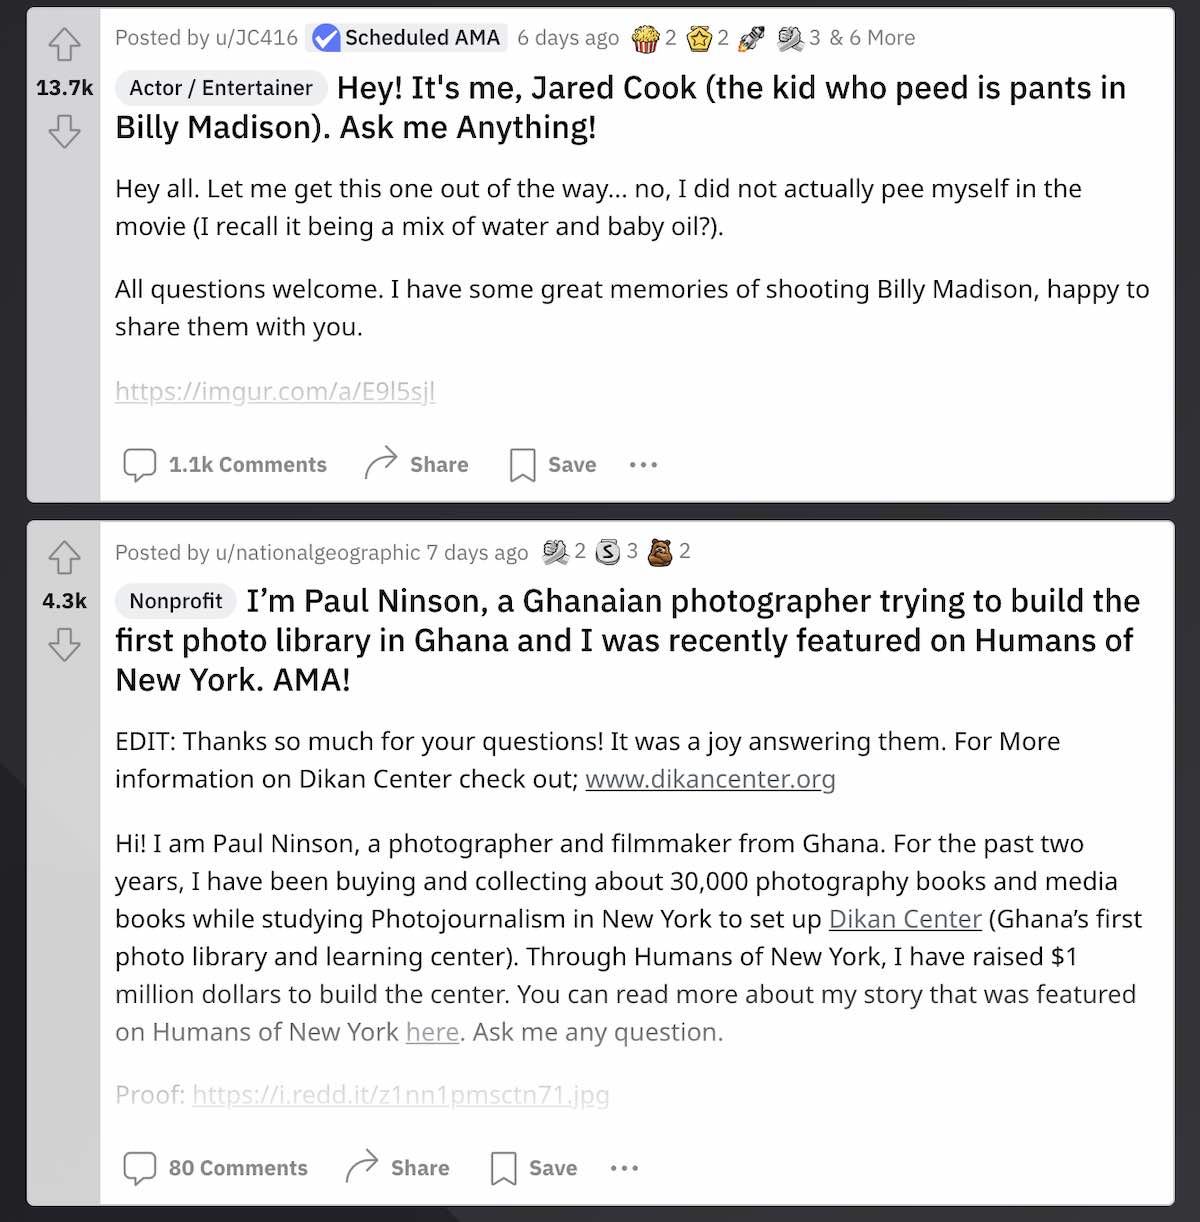 These examples show a scheduled AMA from actor Jared Cook and an unscheduled AMA from a photographer in Ghana.